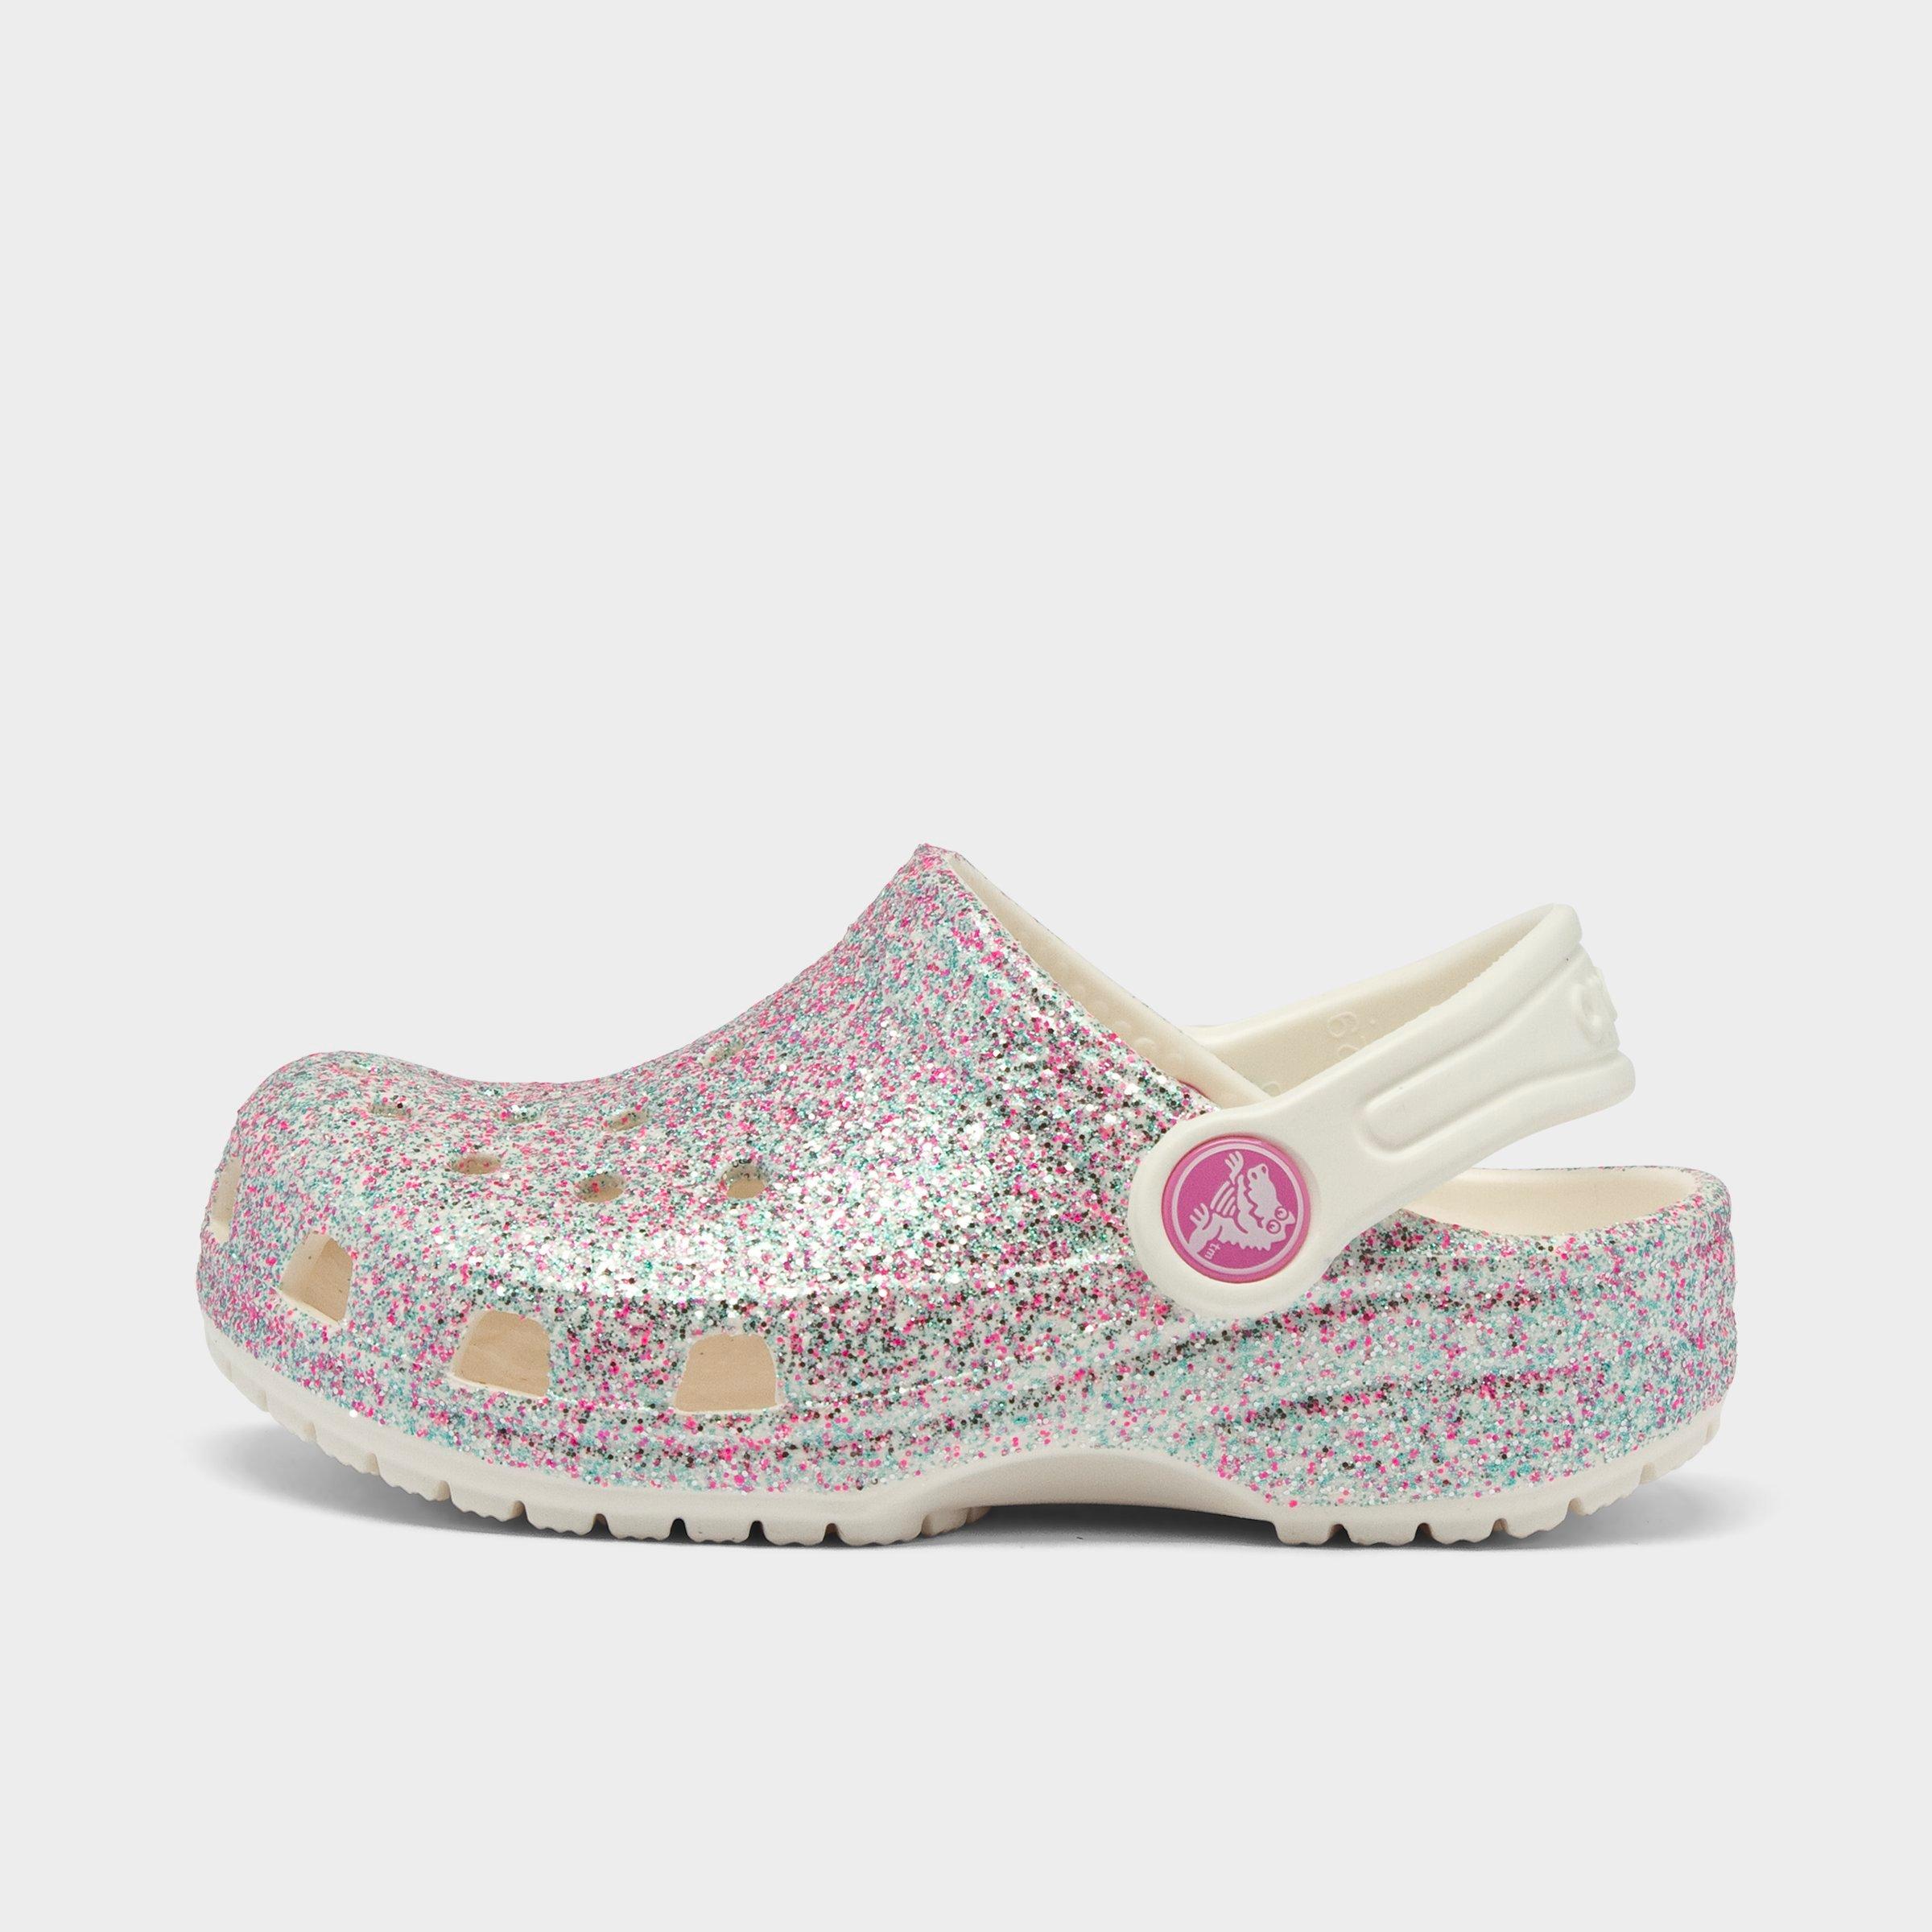 toddler girl clogs shoes